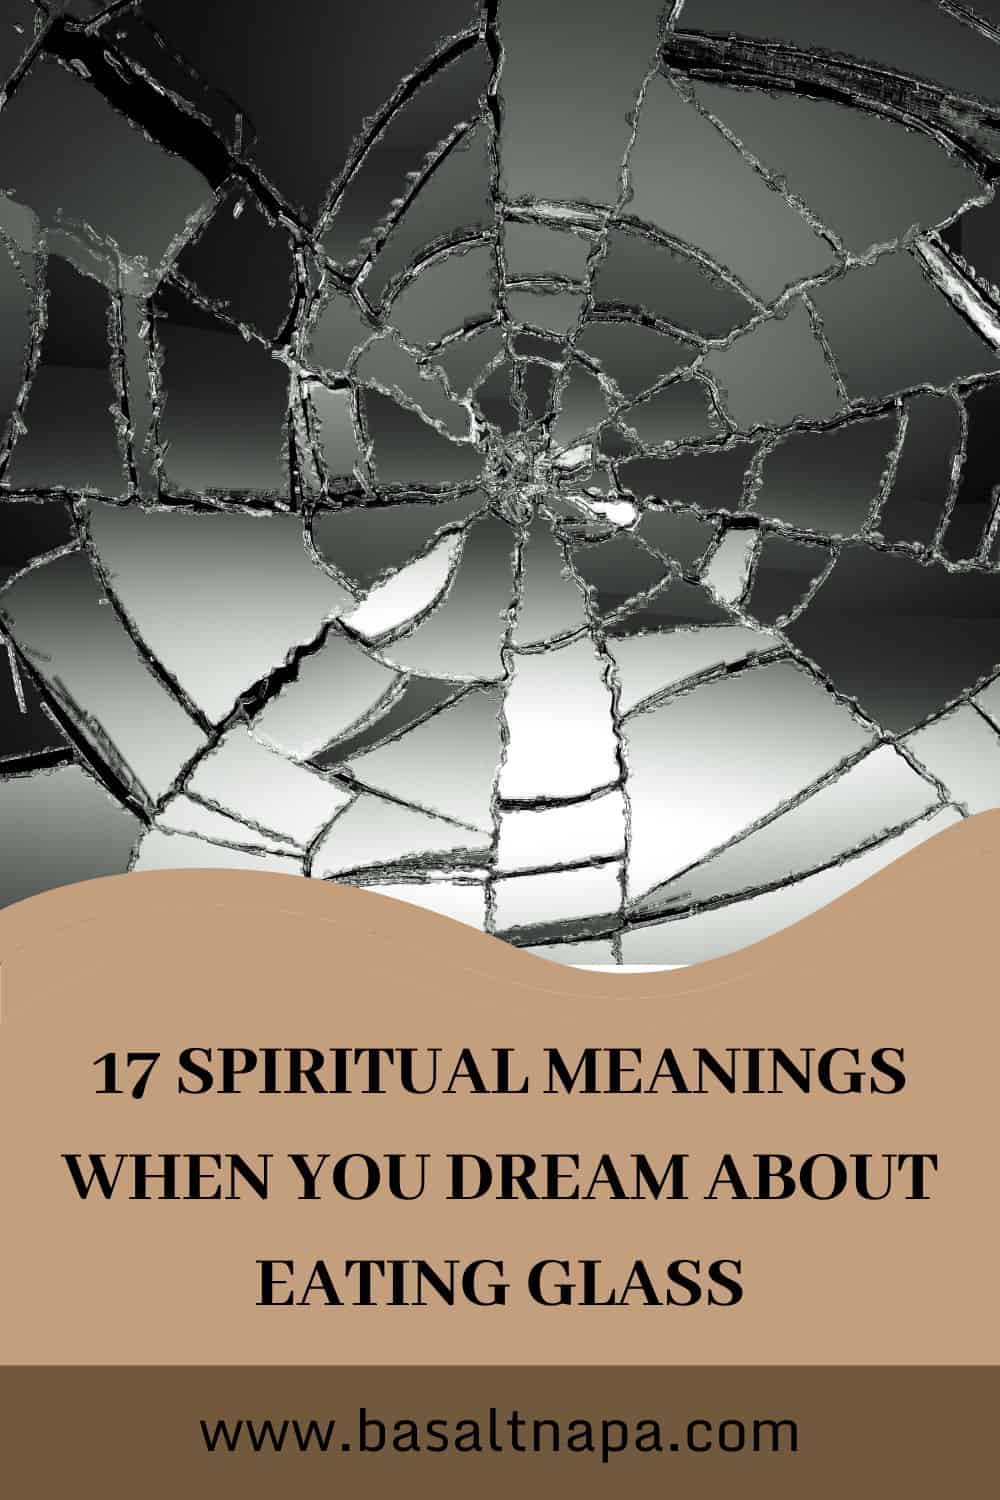 17 Spiritual Meanings When You Dream About Eating Glass